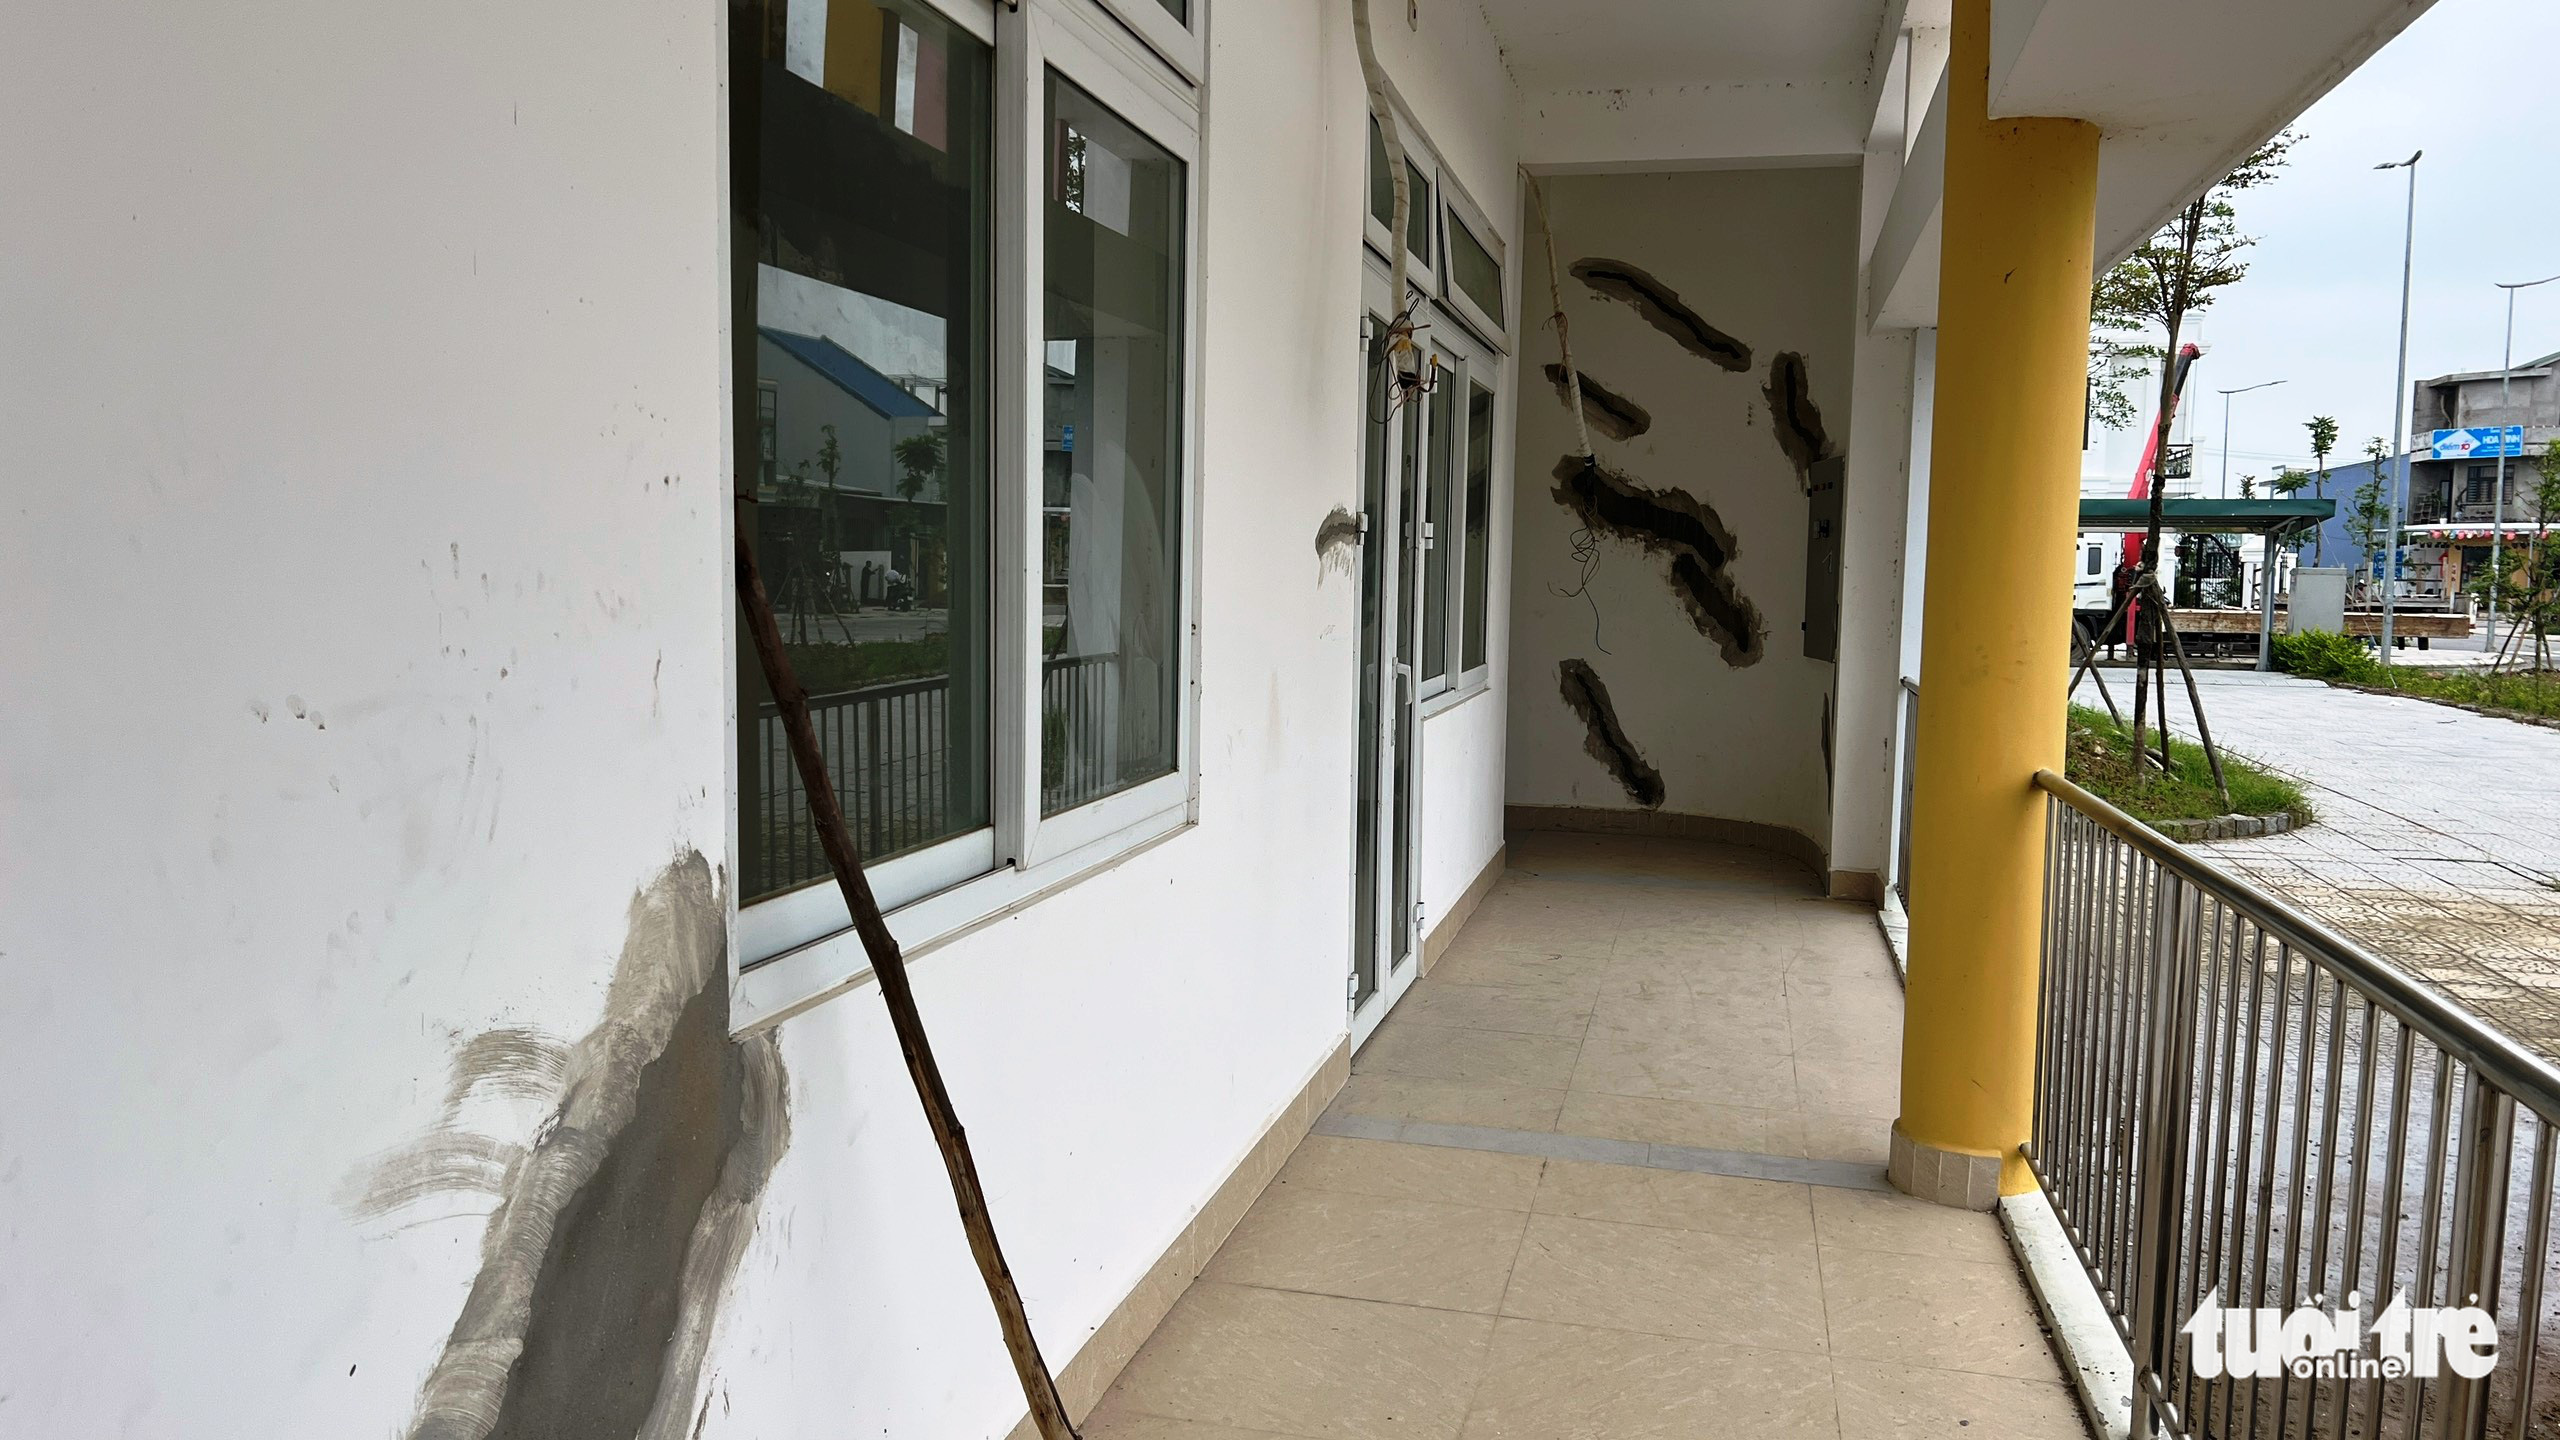 Cracks are found inside Hoang Mai Kindergarten in Thua Thien-Hue Province, Vietnam. Photo: Nhat Linh / Tuoi Tre